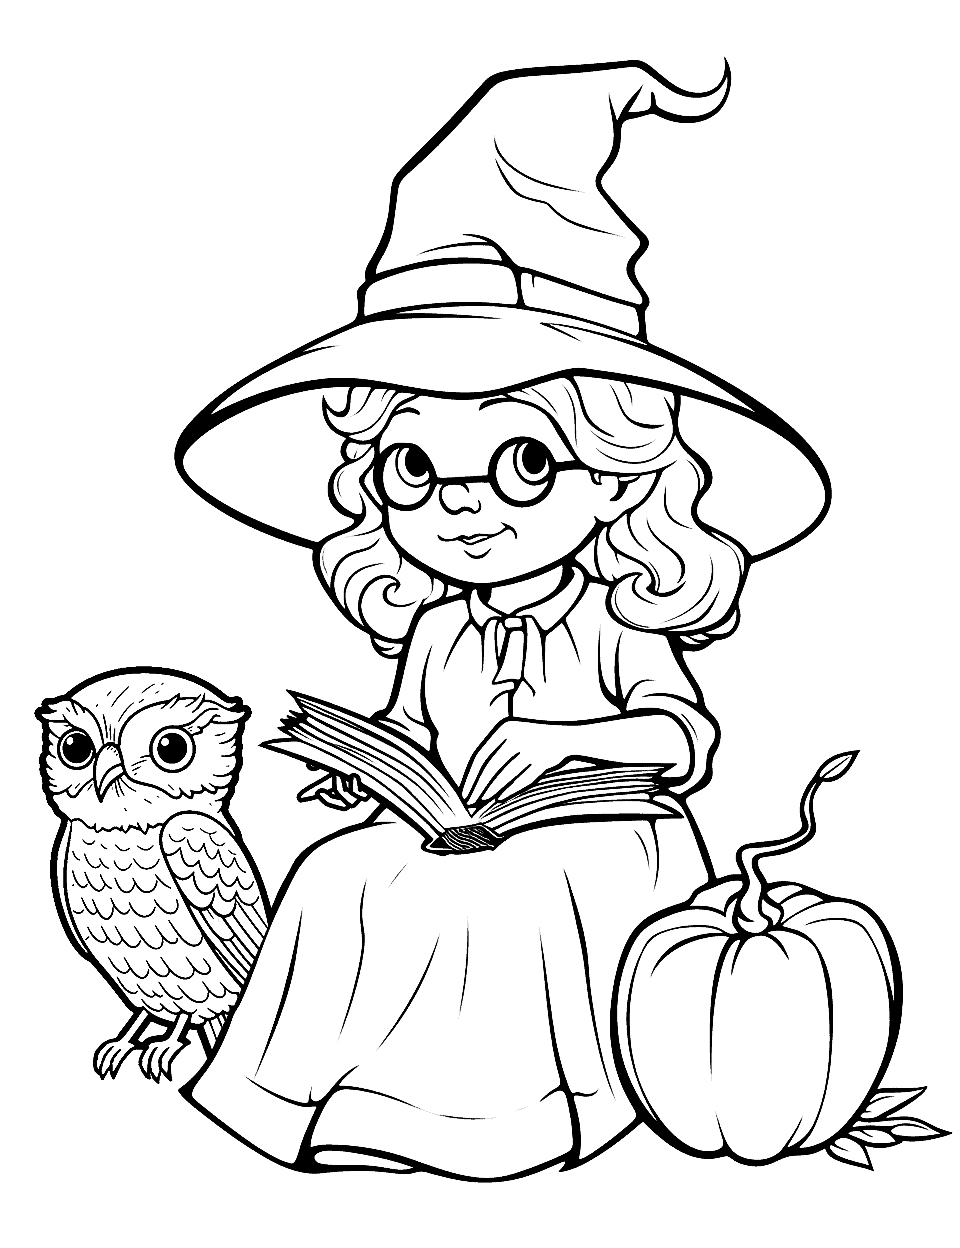 Cornelia the Wise Witch Coloring Page - Cornelia, an elderly witch, reading a spell book with a wise owl perched nearby.